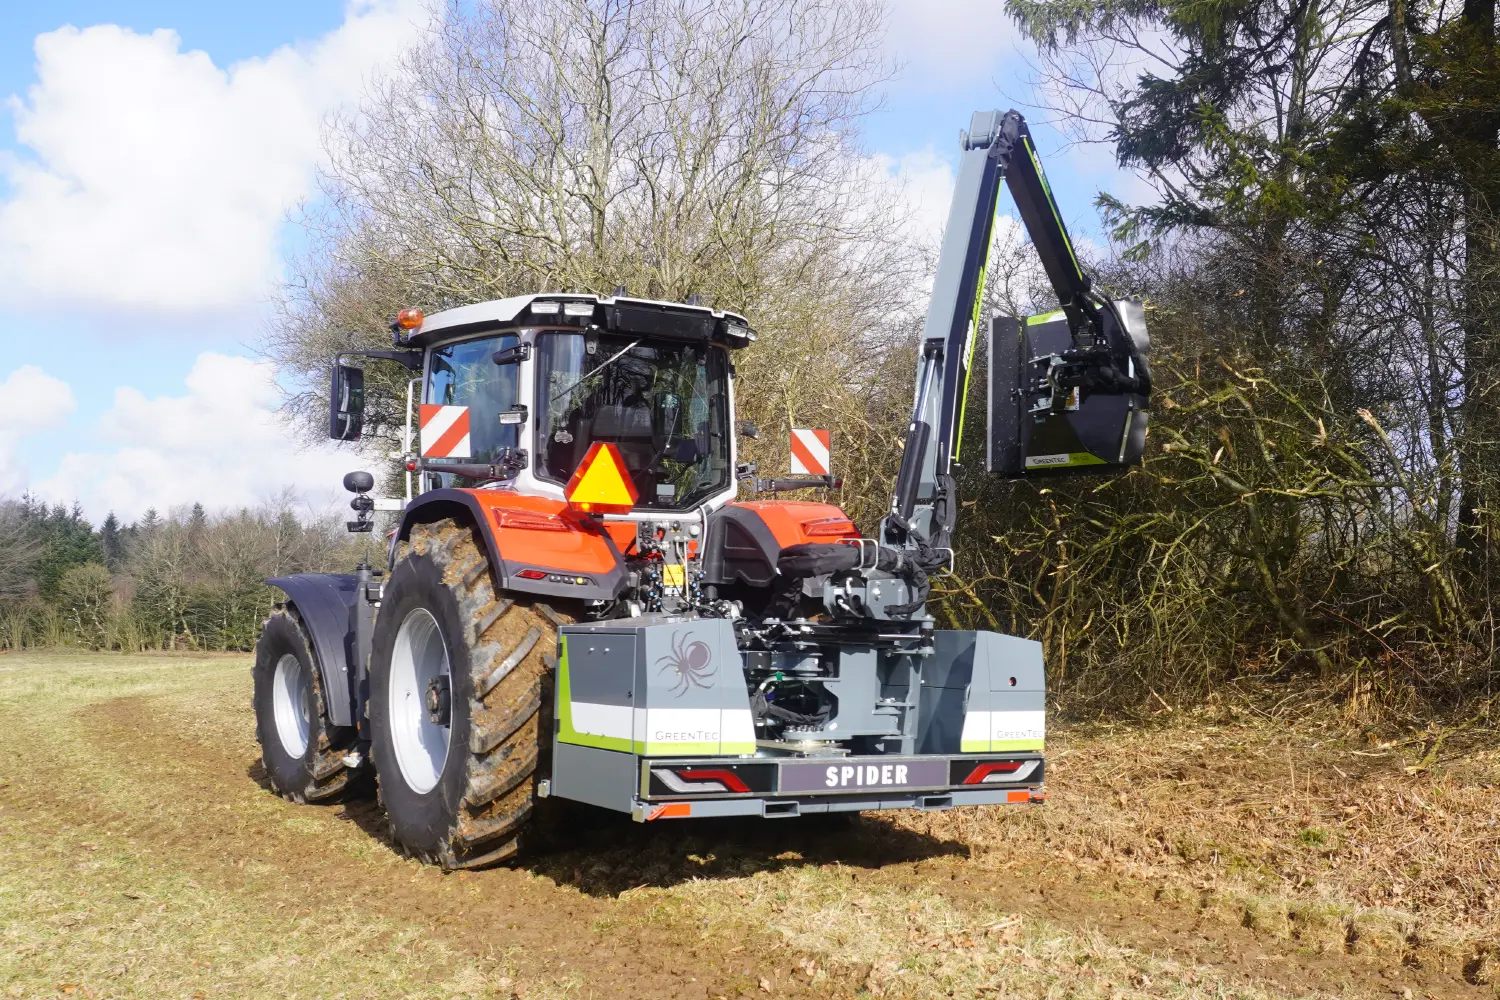 The RX 133 can also be used for vertical cutting of branches